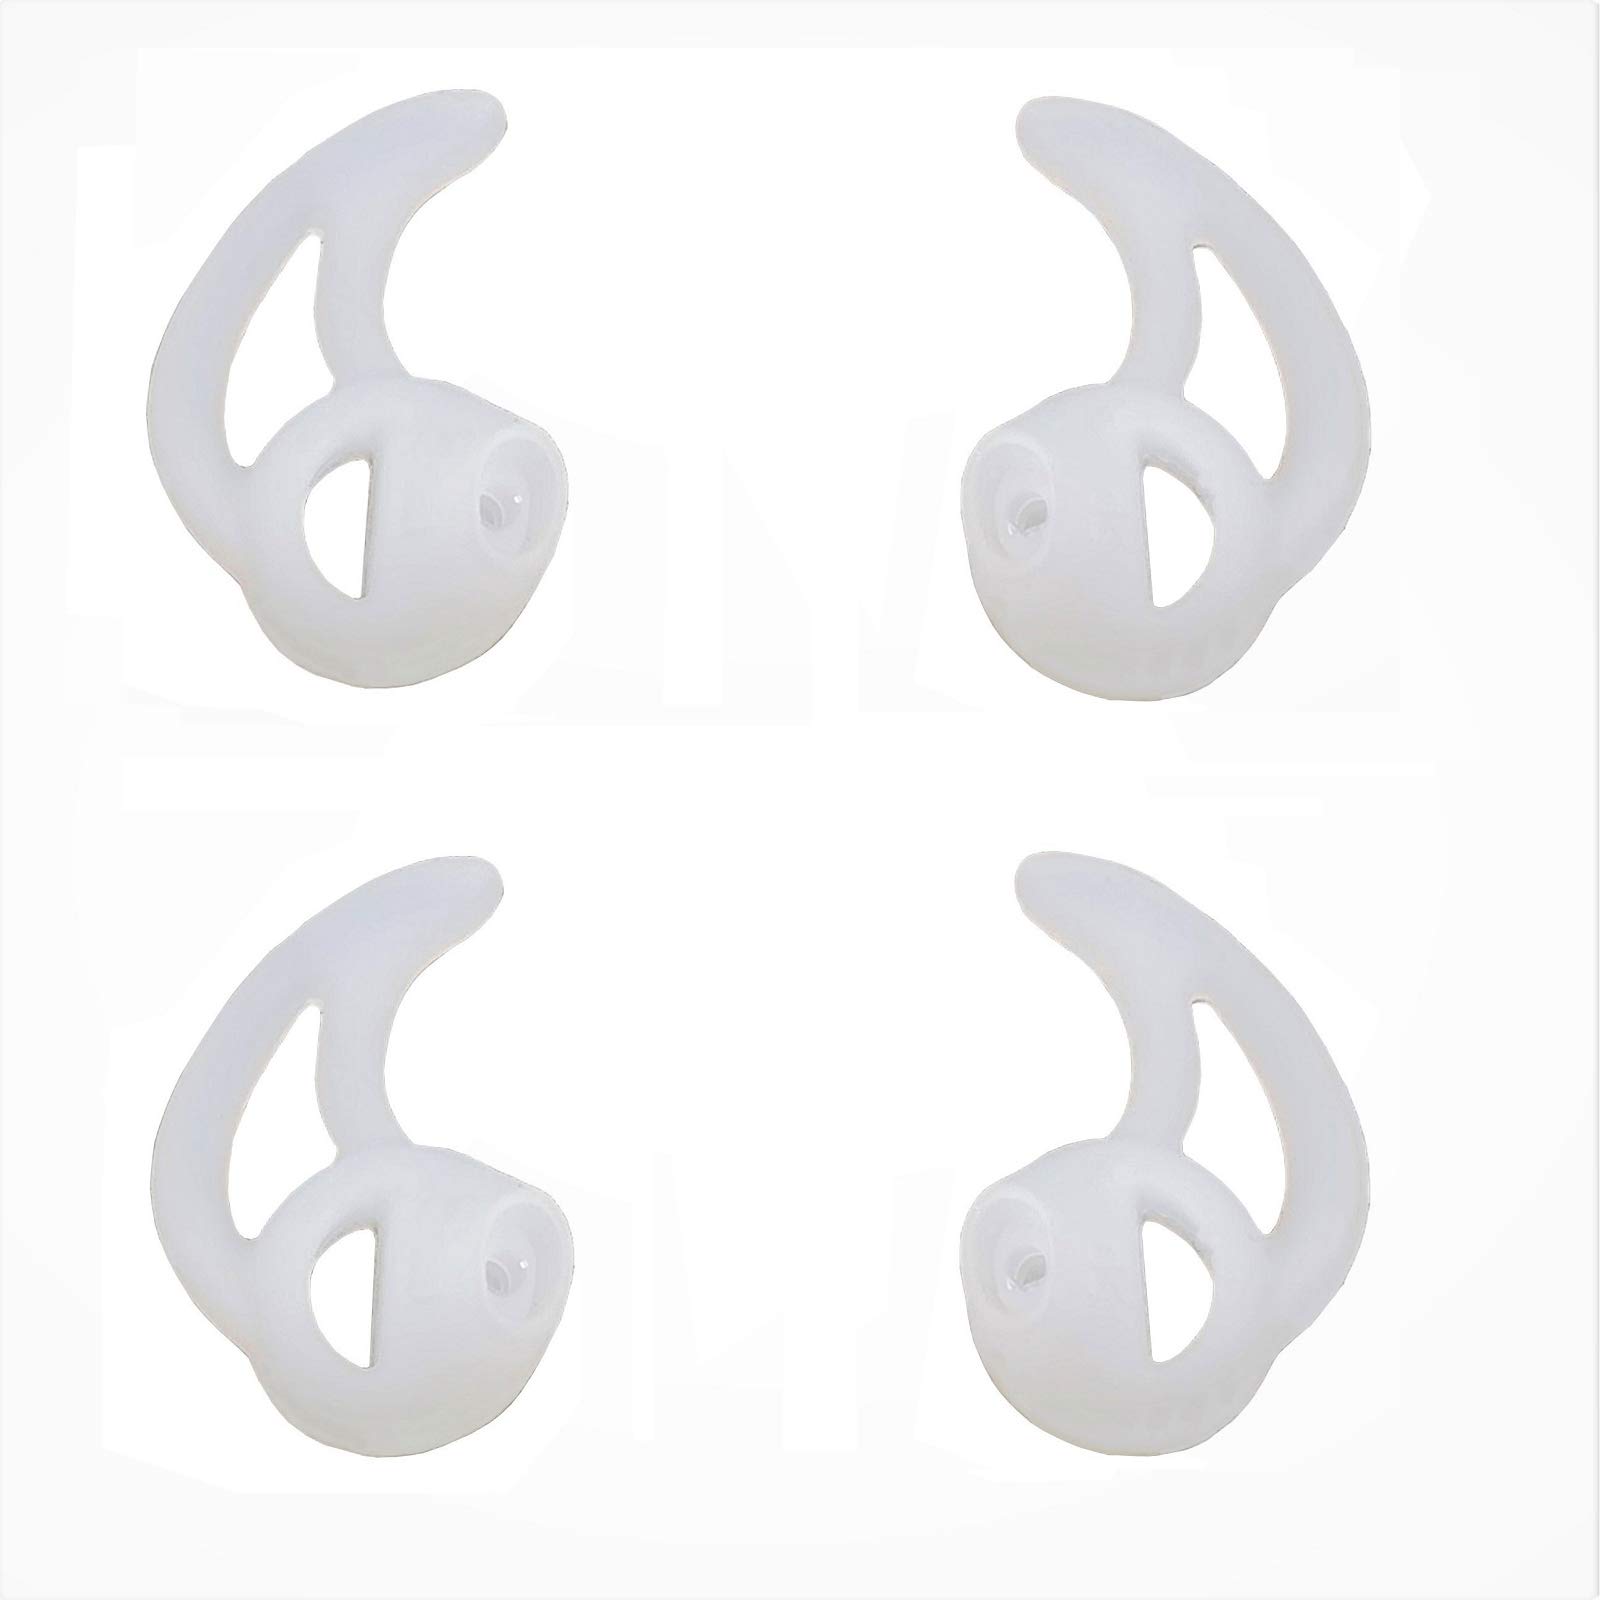 Silicone fin ear mold for two way radio earpiece replacement earmold earbud tips for surveillance police earpiece coil tube headset pair fin large electronics